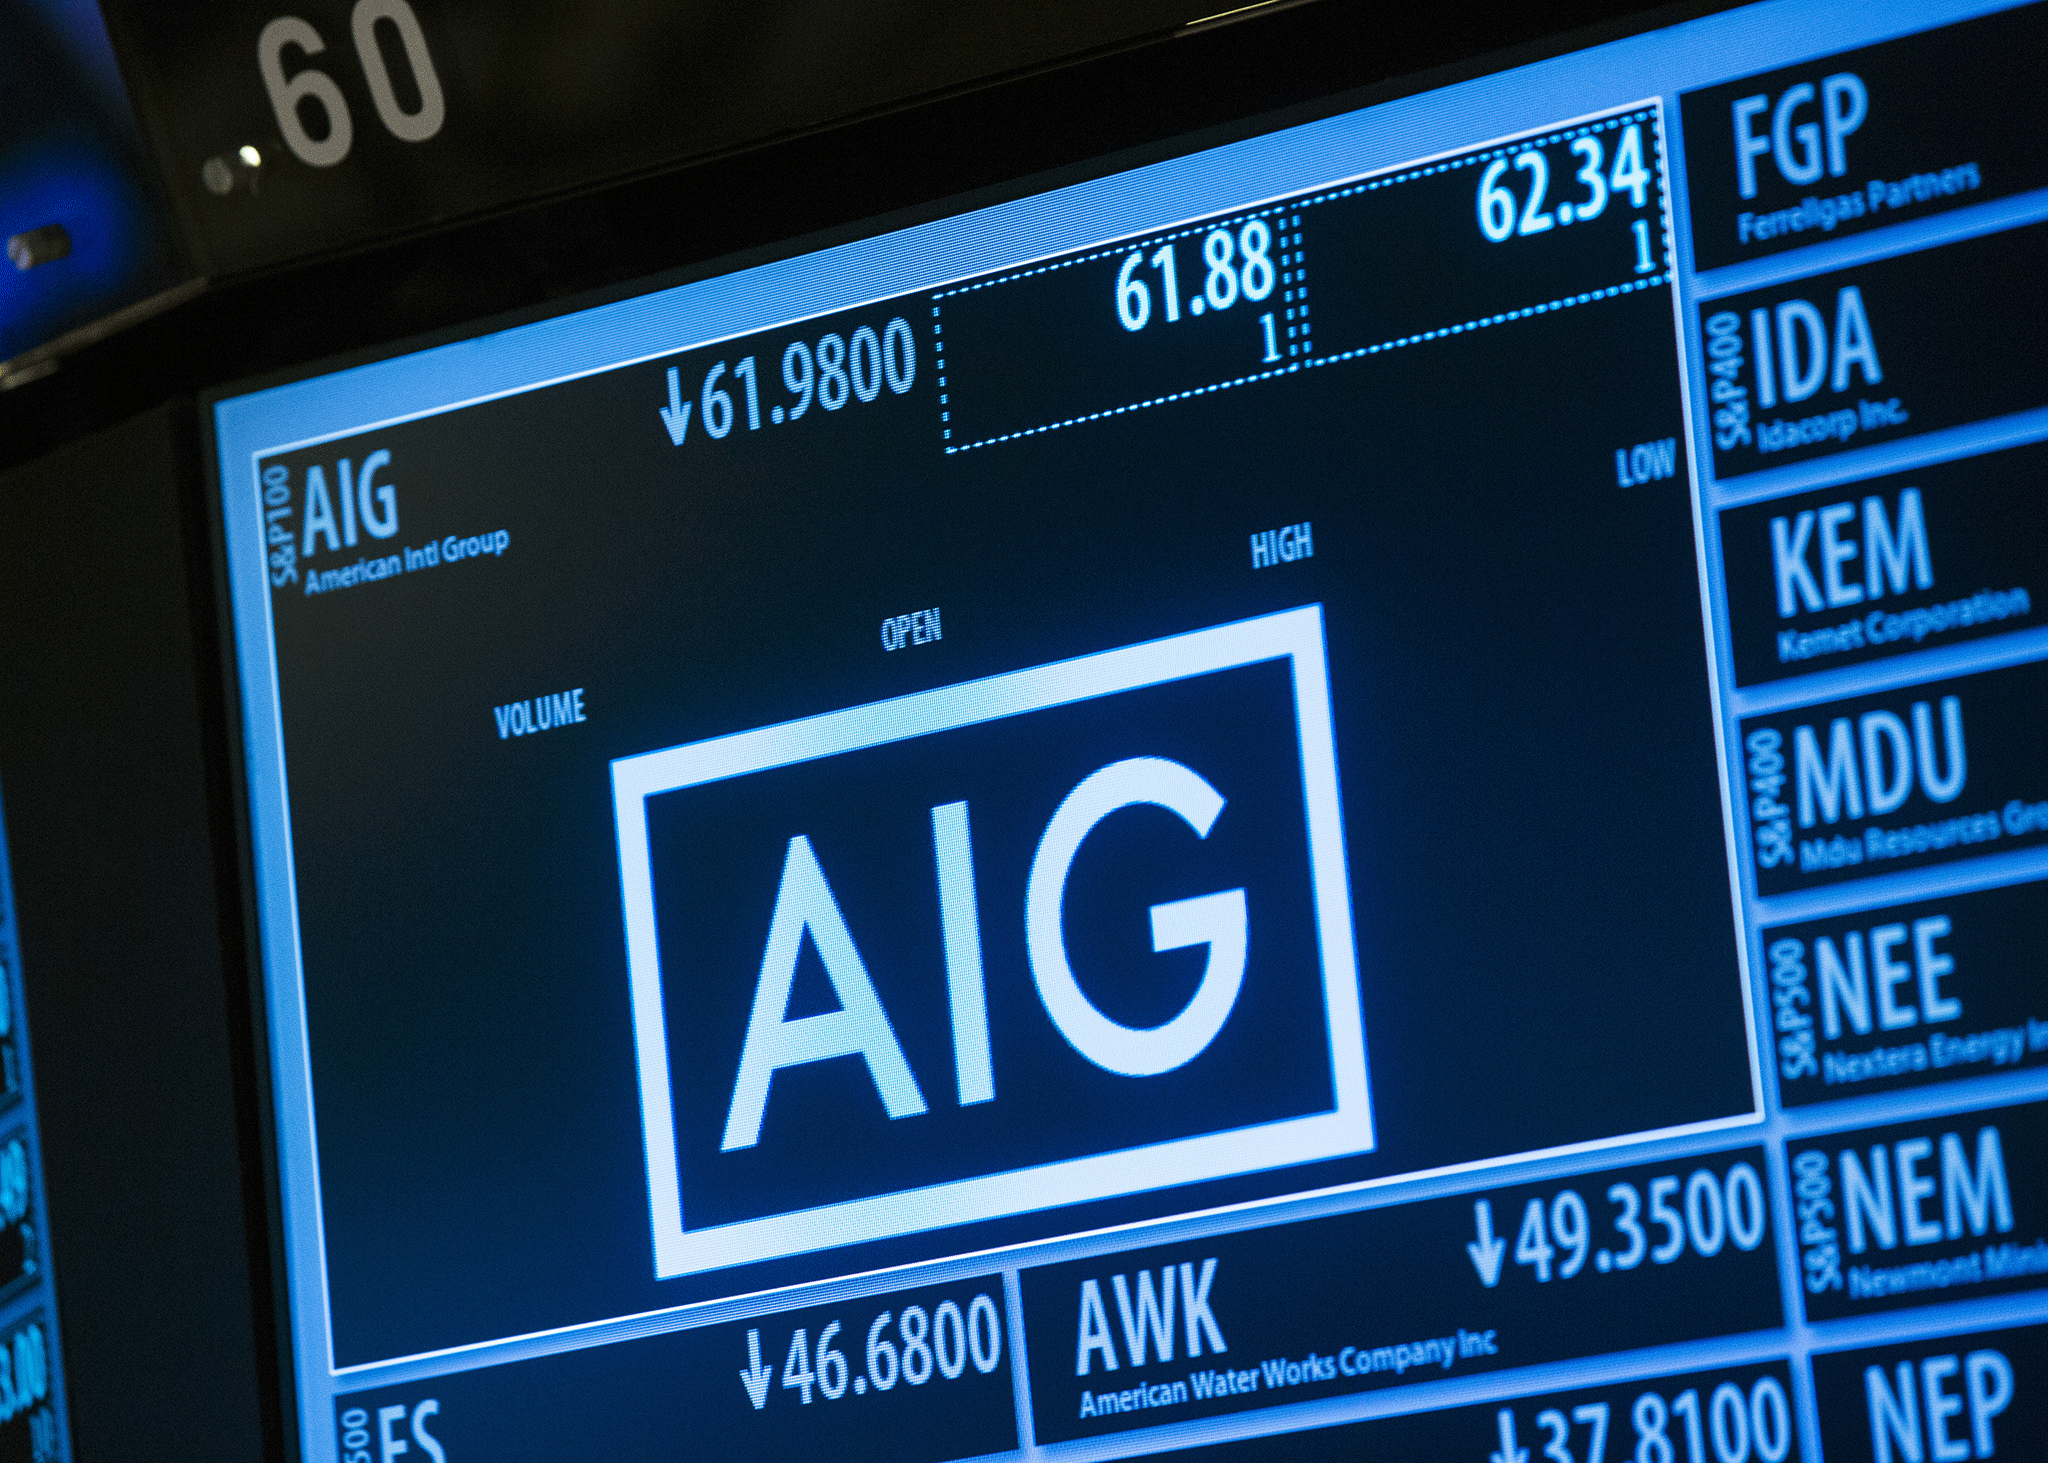 Luxembourg office will write insurance business in the European Economic Area and Switzerland once the UK exits the EU, AIG said